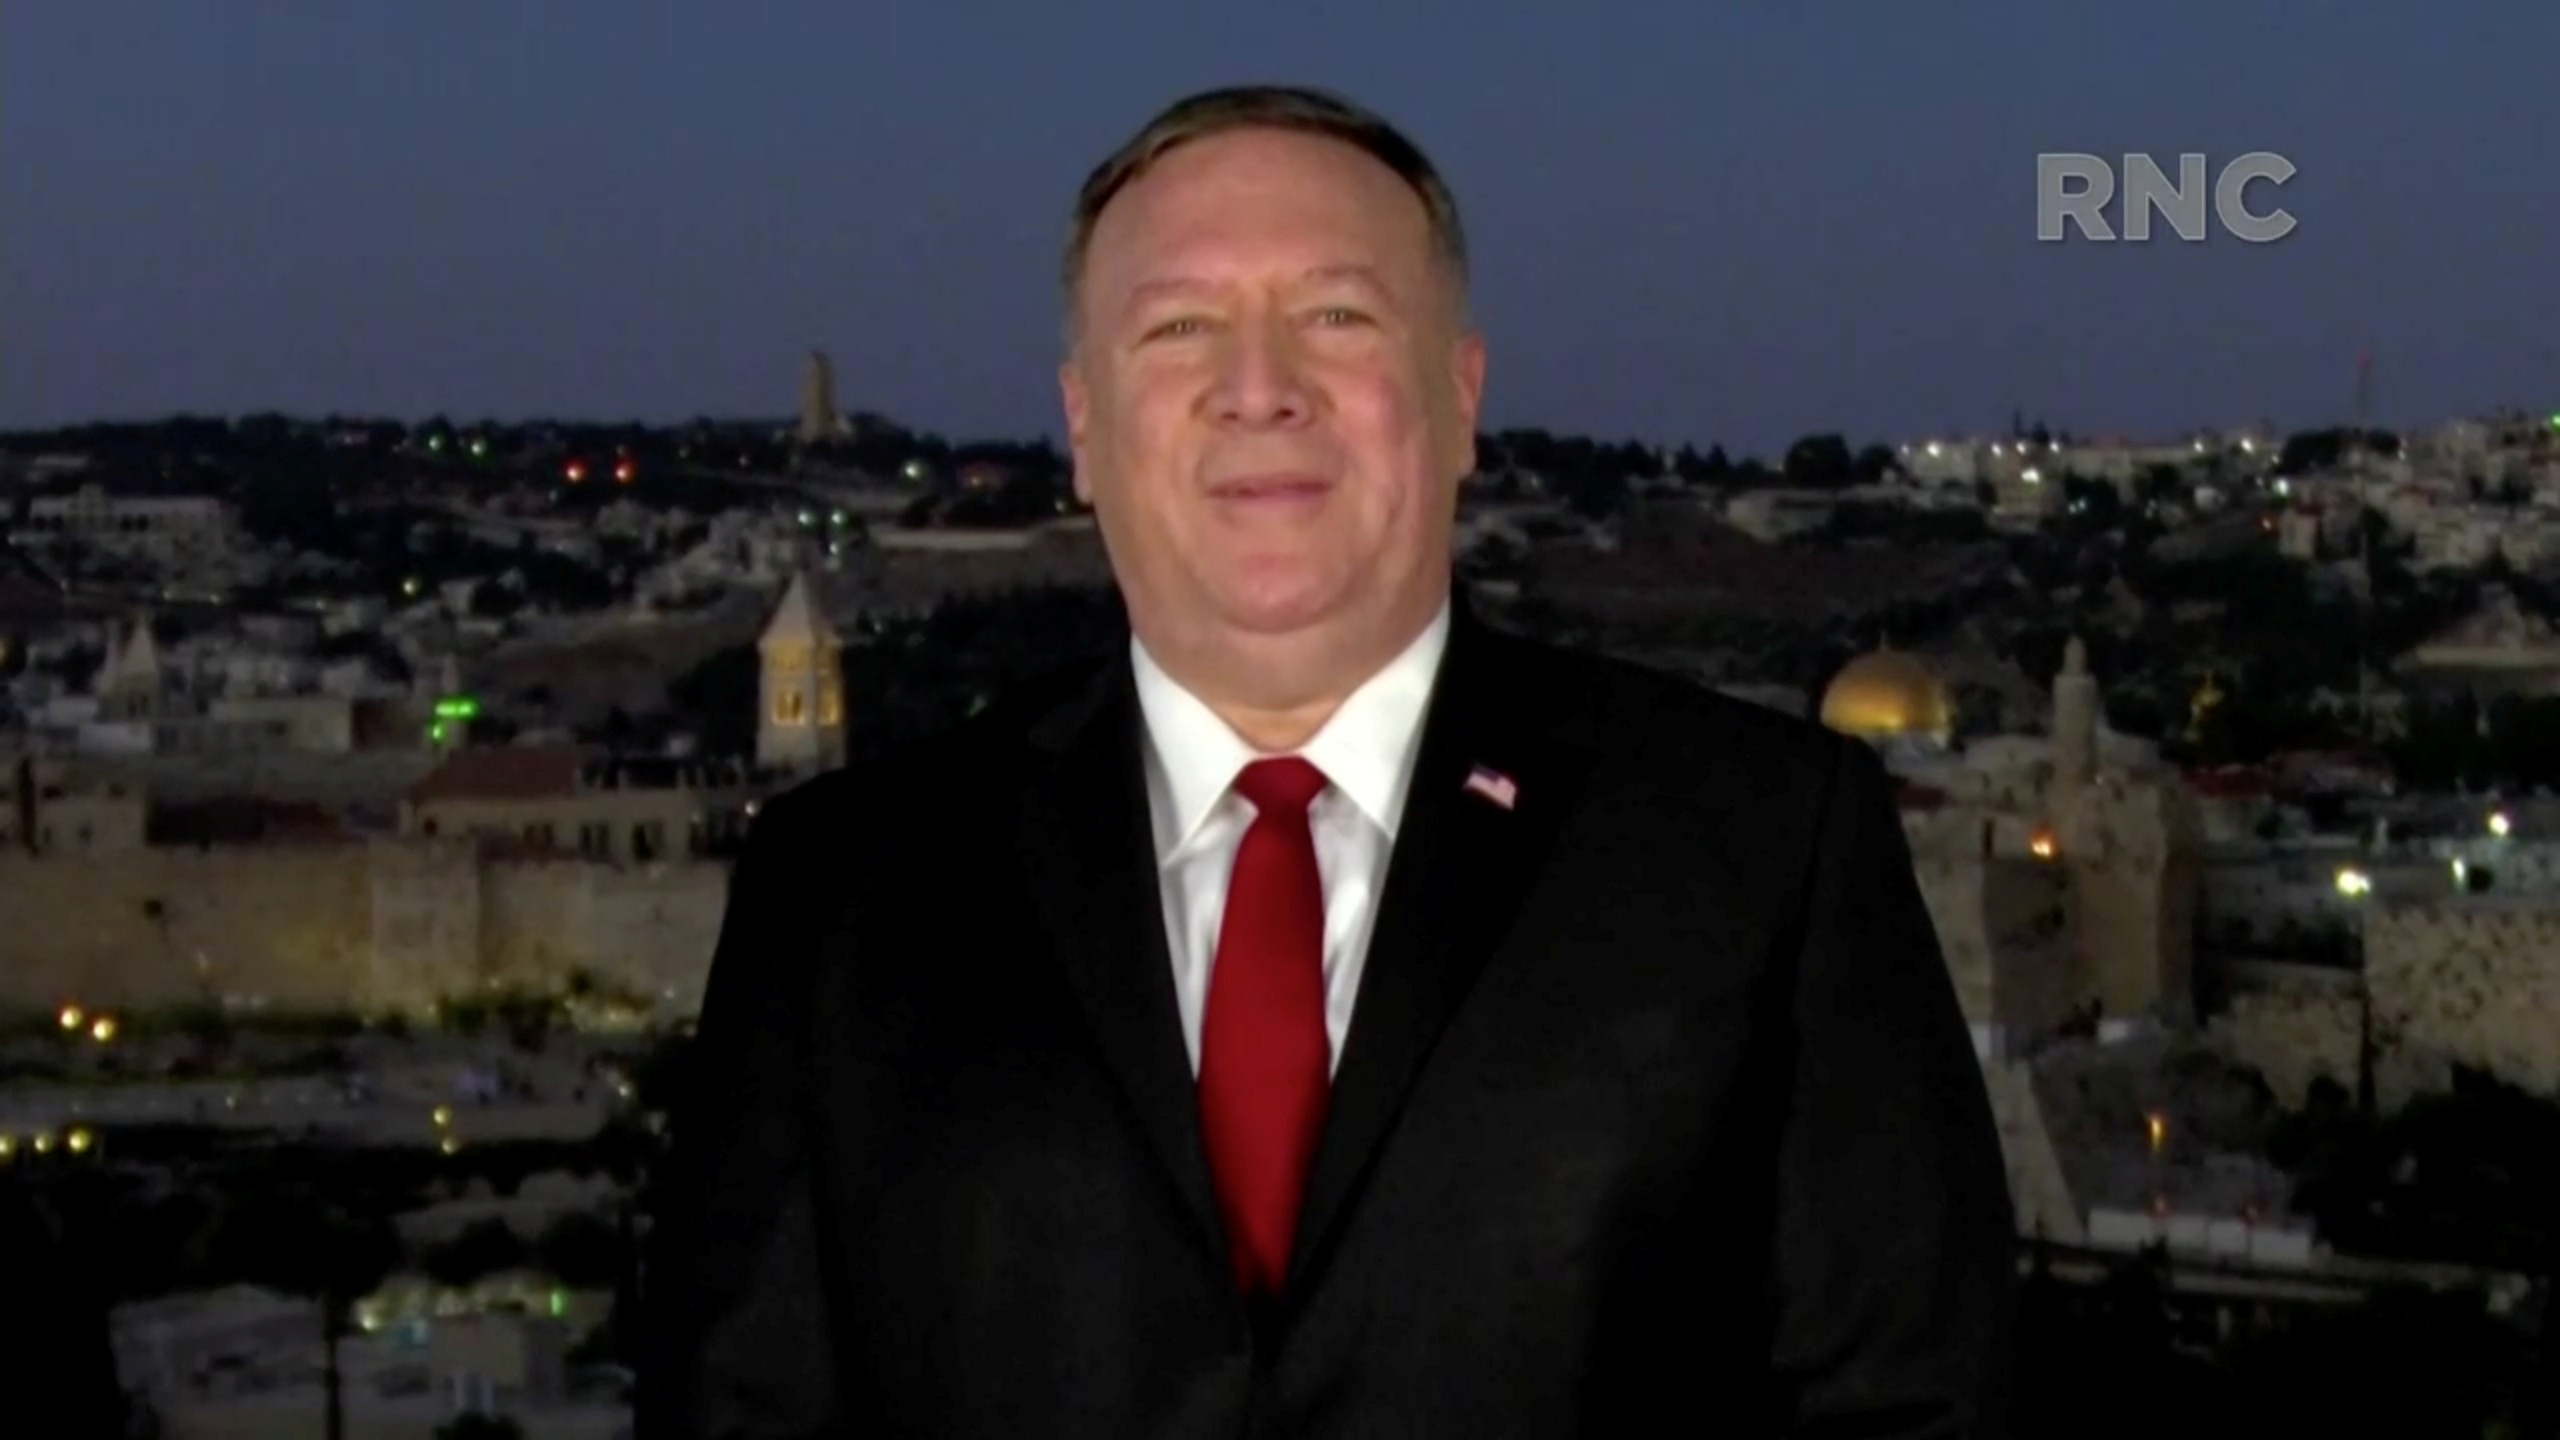 U.S. Secretary of State Mike Pompeo speaks by video feed from Jerusalem during the largely virtual 2020 Republican National Convention broadcast from Washington, U.S. August 25, 2020. 2020 Republican National Convention/Handout via REUTERS THIS IMAGE HAS BEEN SUPPLIED BY A THIRD PARTY